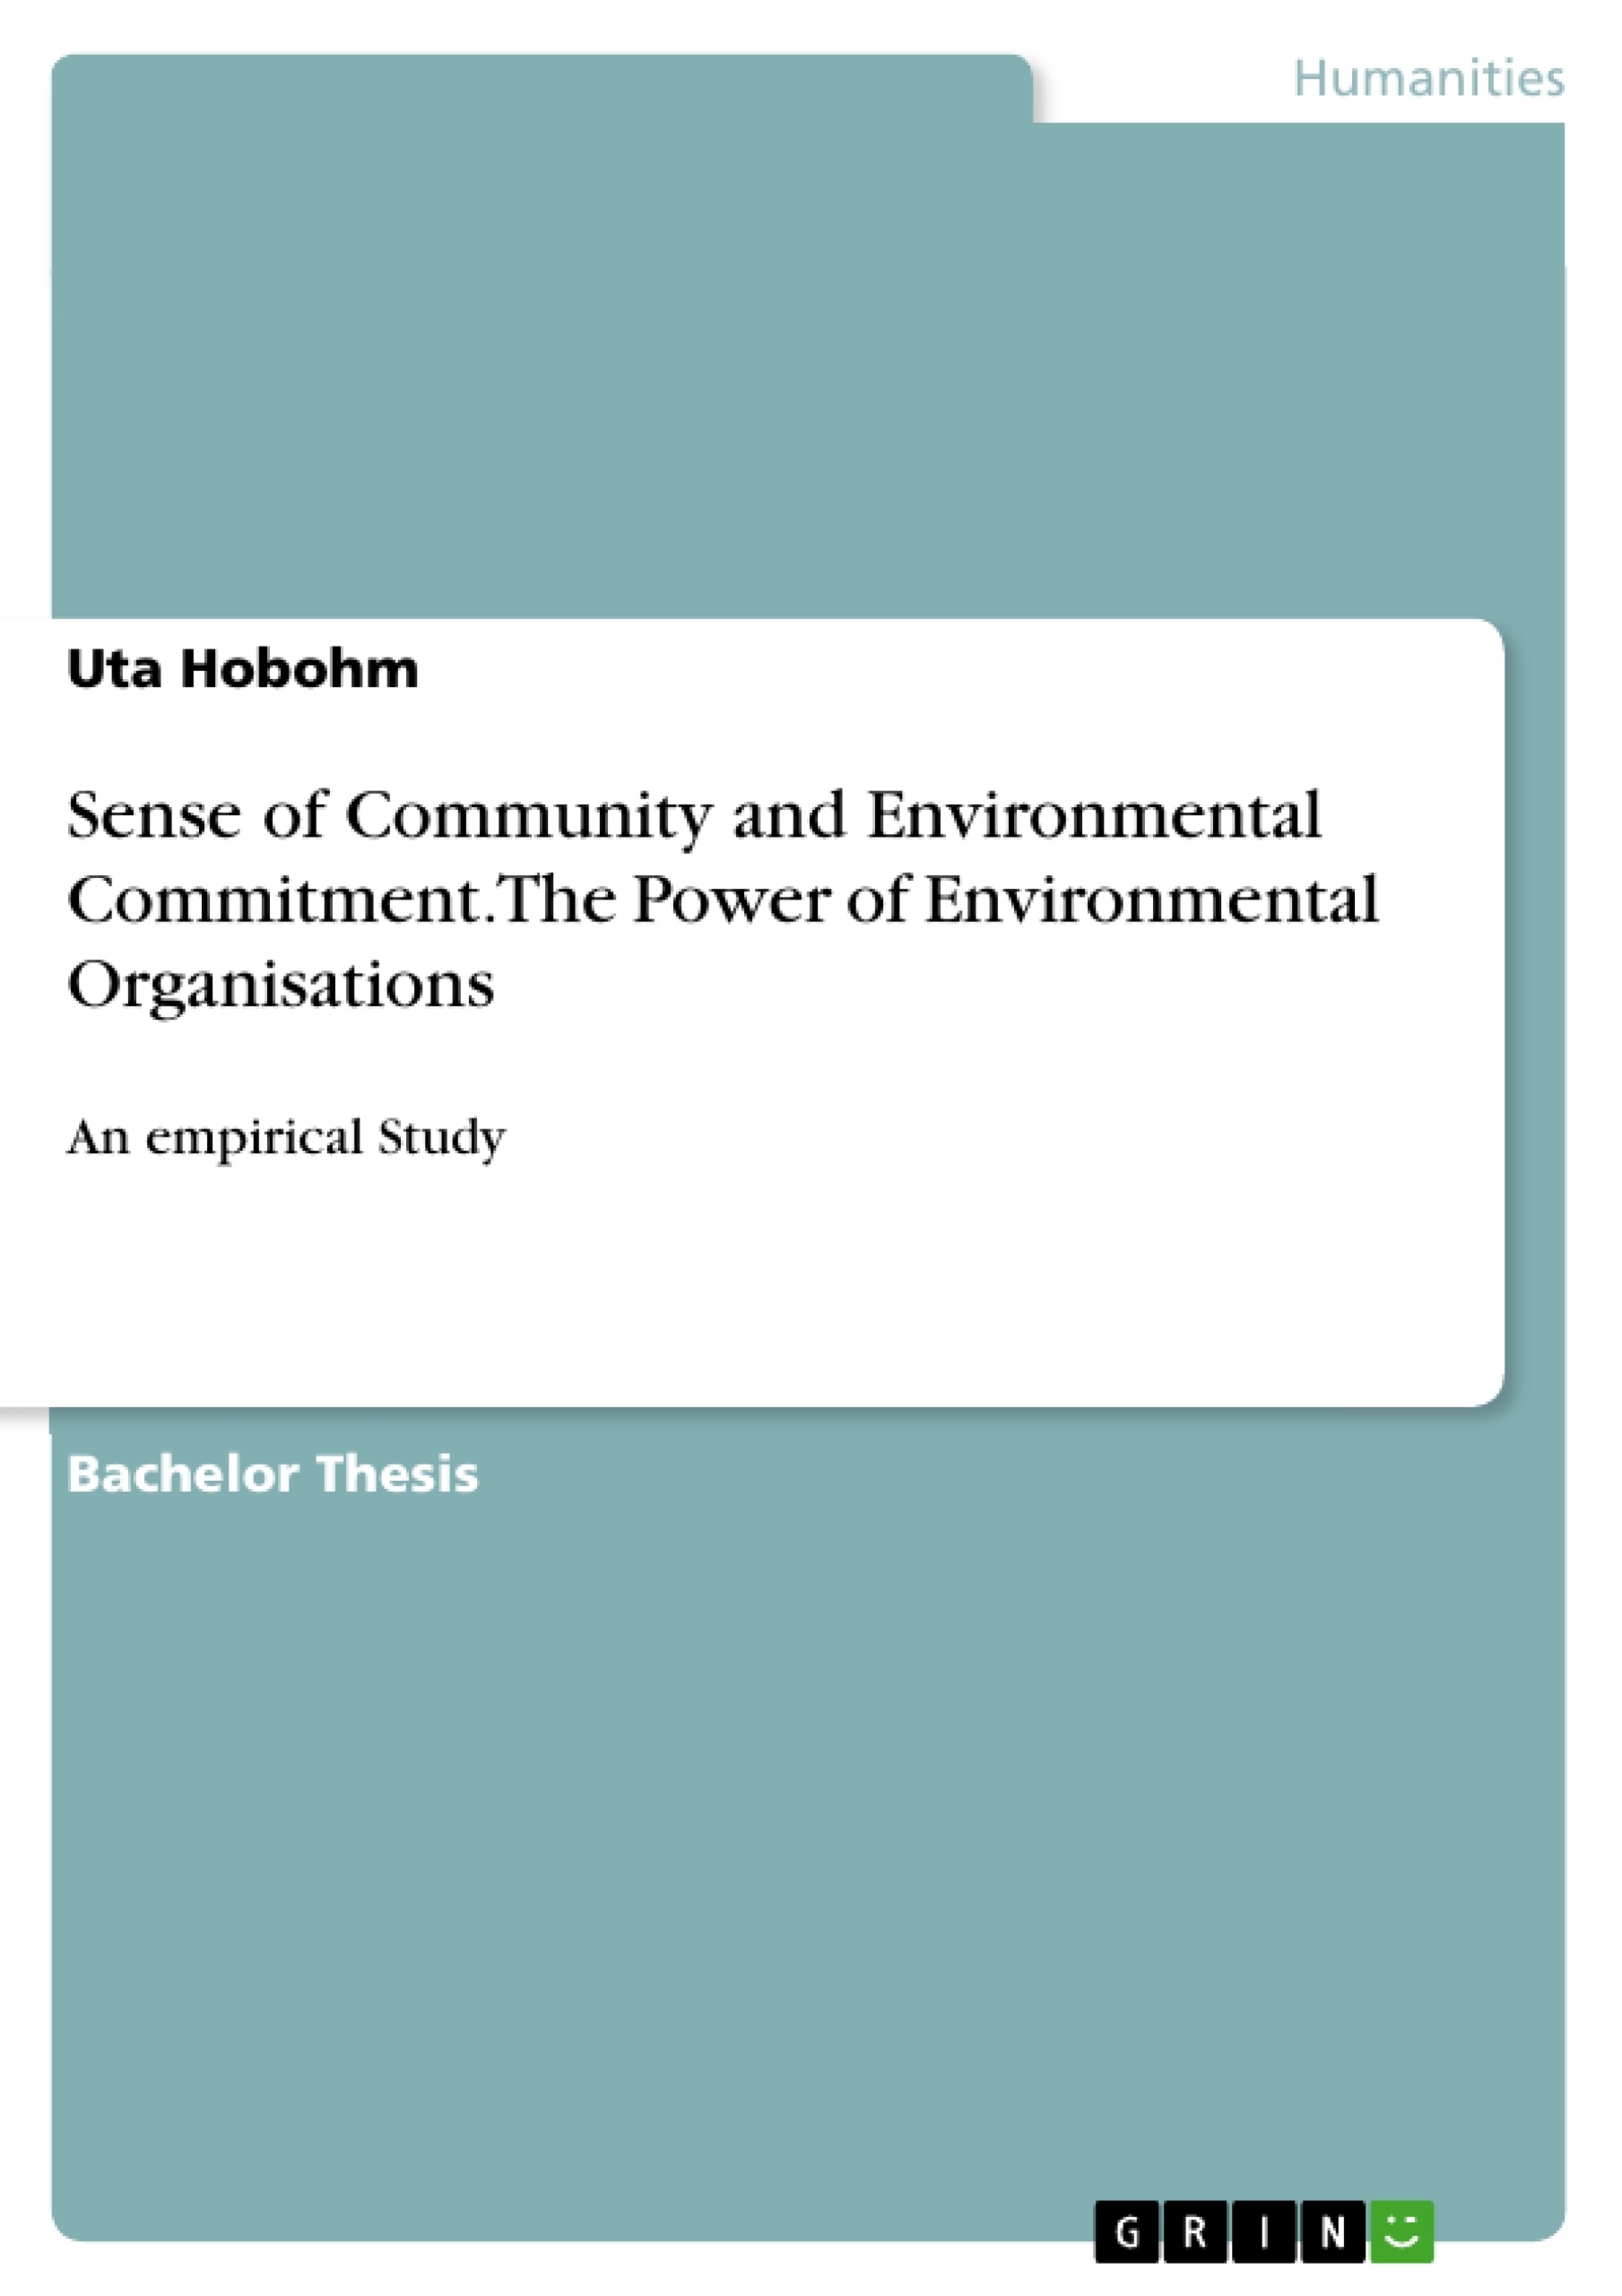 Title: Sense of Community and Environmental Commitment. The Power of Environmental Organisations